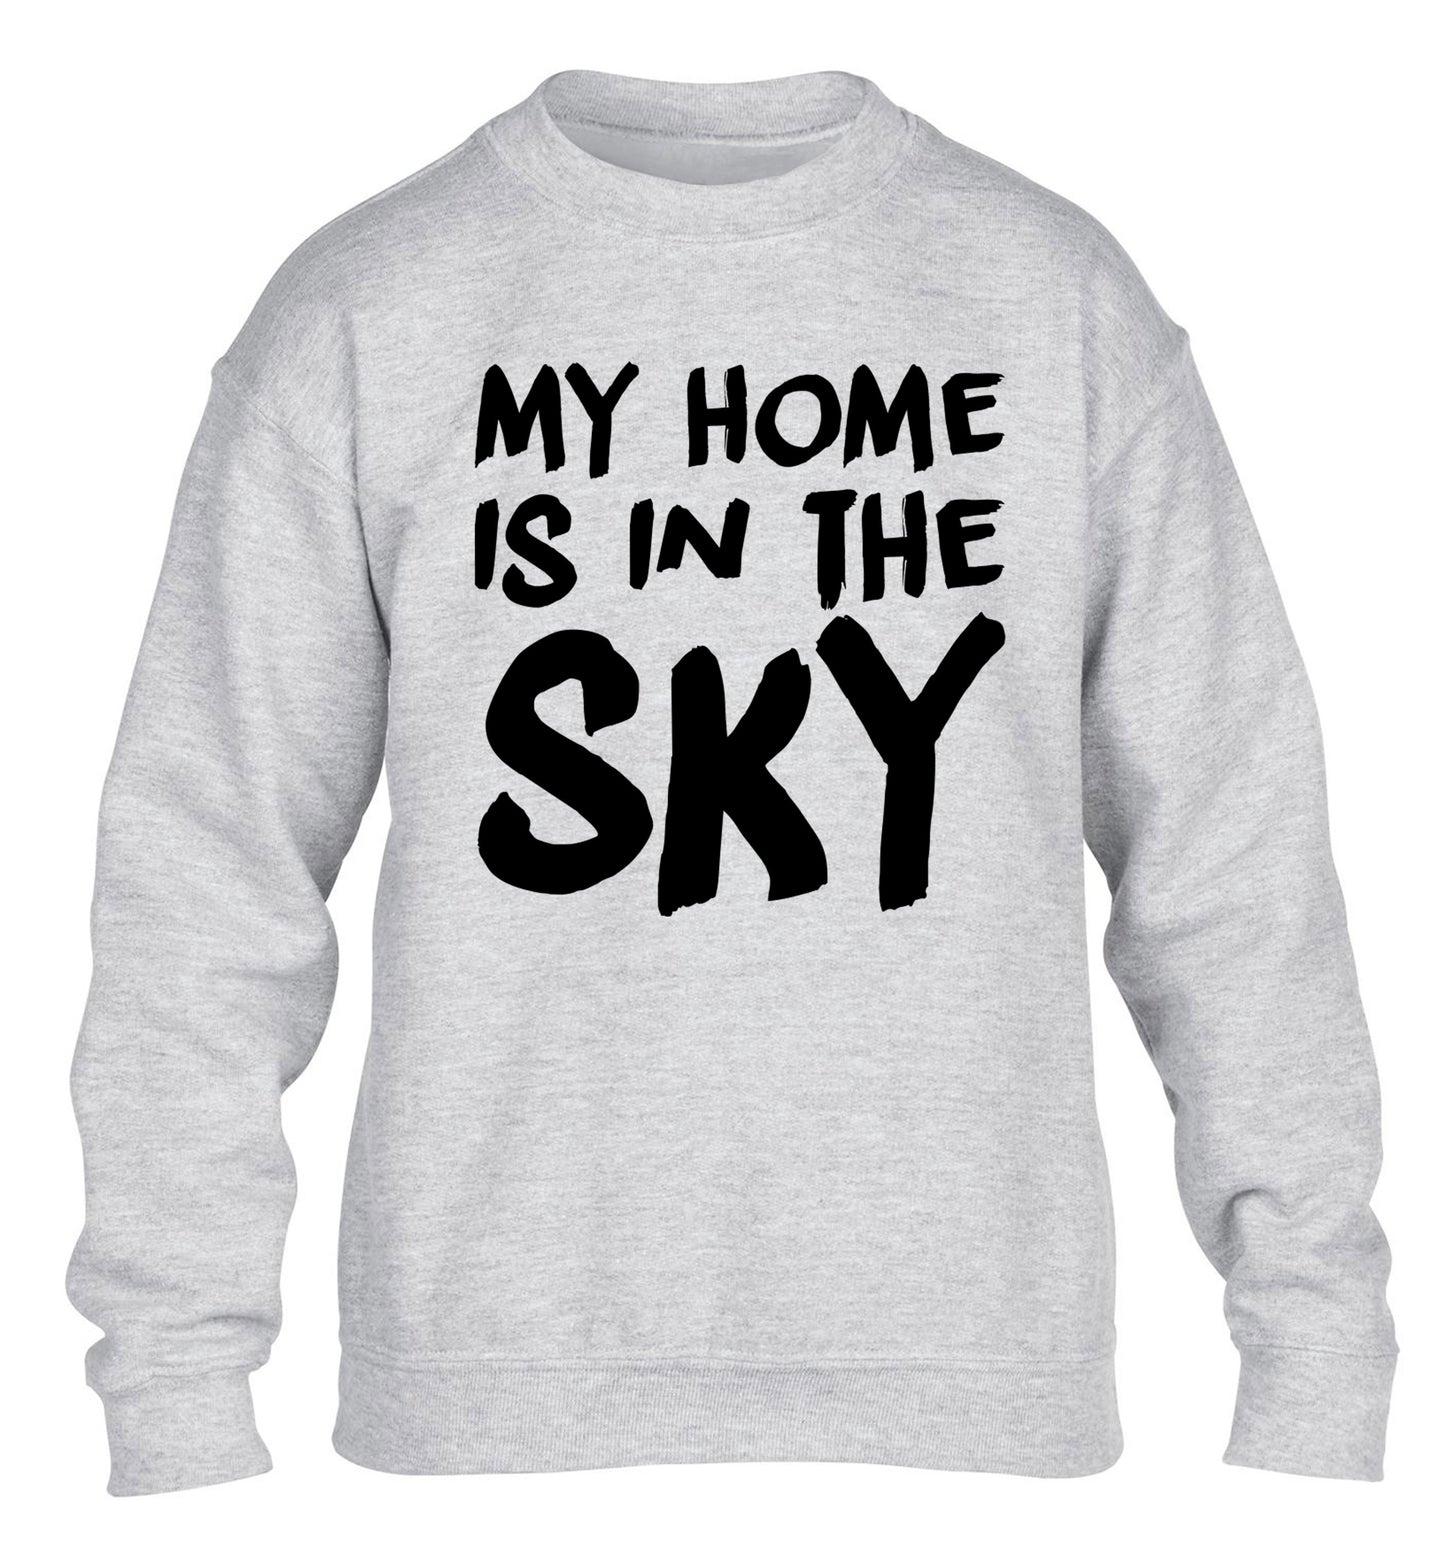 My home is in the sky children's grey sweater 12-14 Years